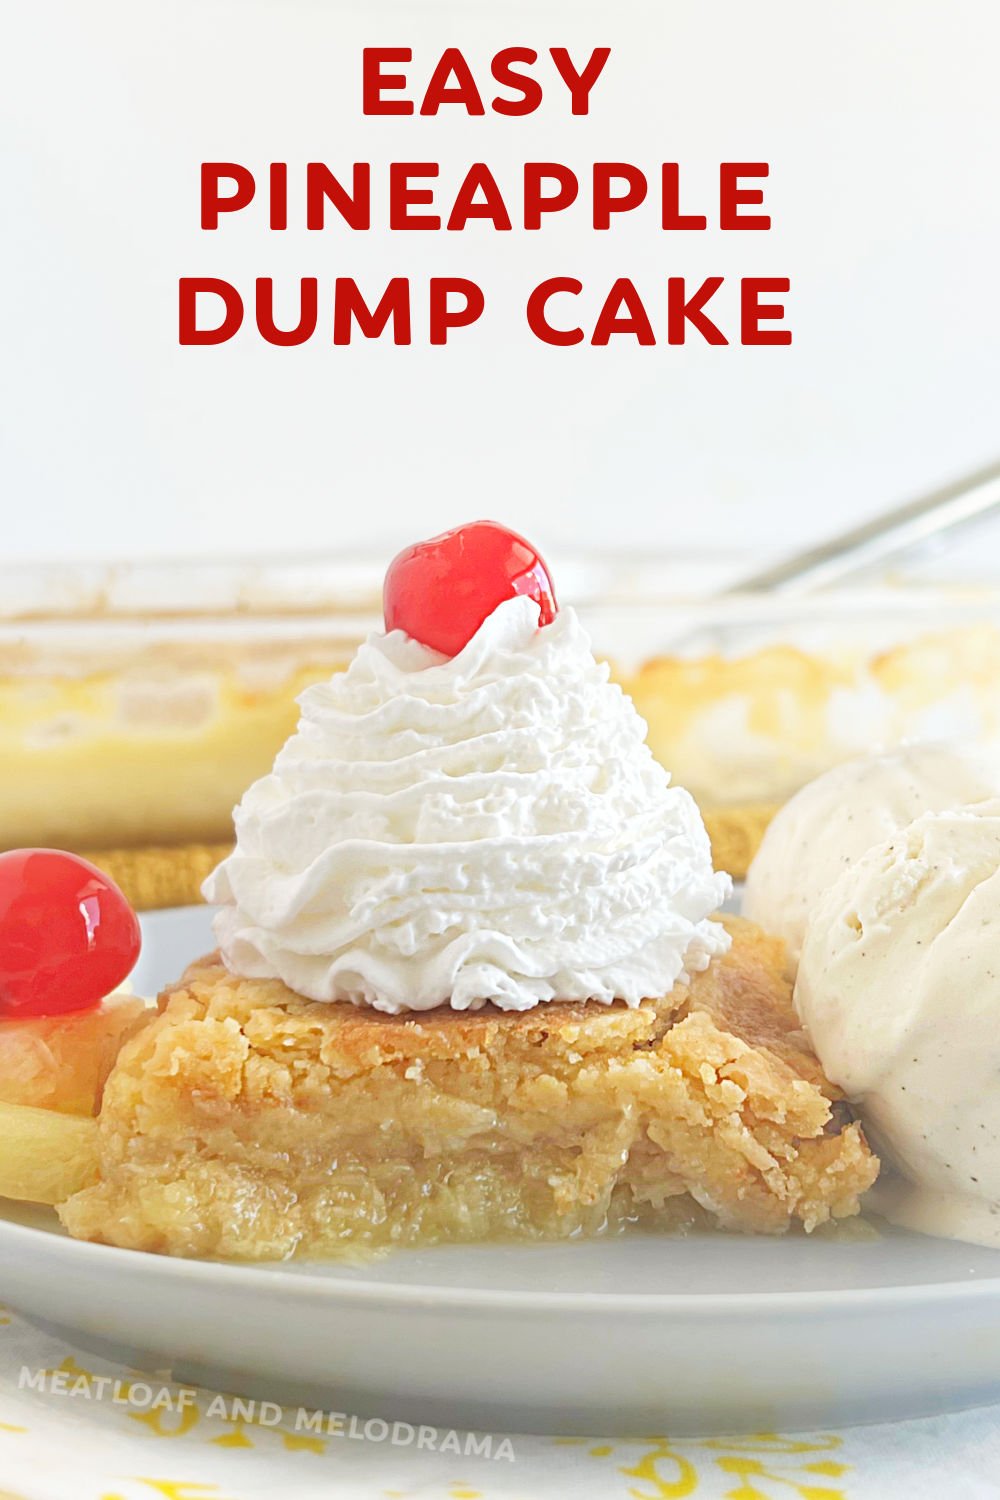 This Pineapple Dump Cake recipe combines cake mix, crushed pineapple and butter to make a delicious dessert that's a family favorite! One of the easiest desserts ever and budget friendly, too! via @meamel